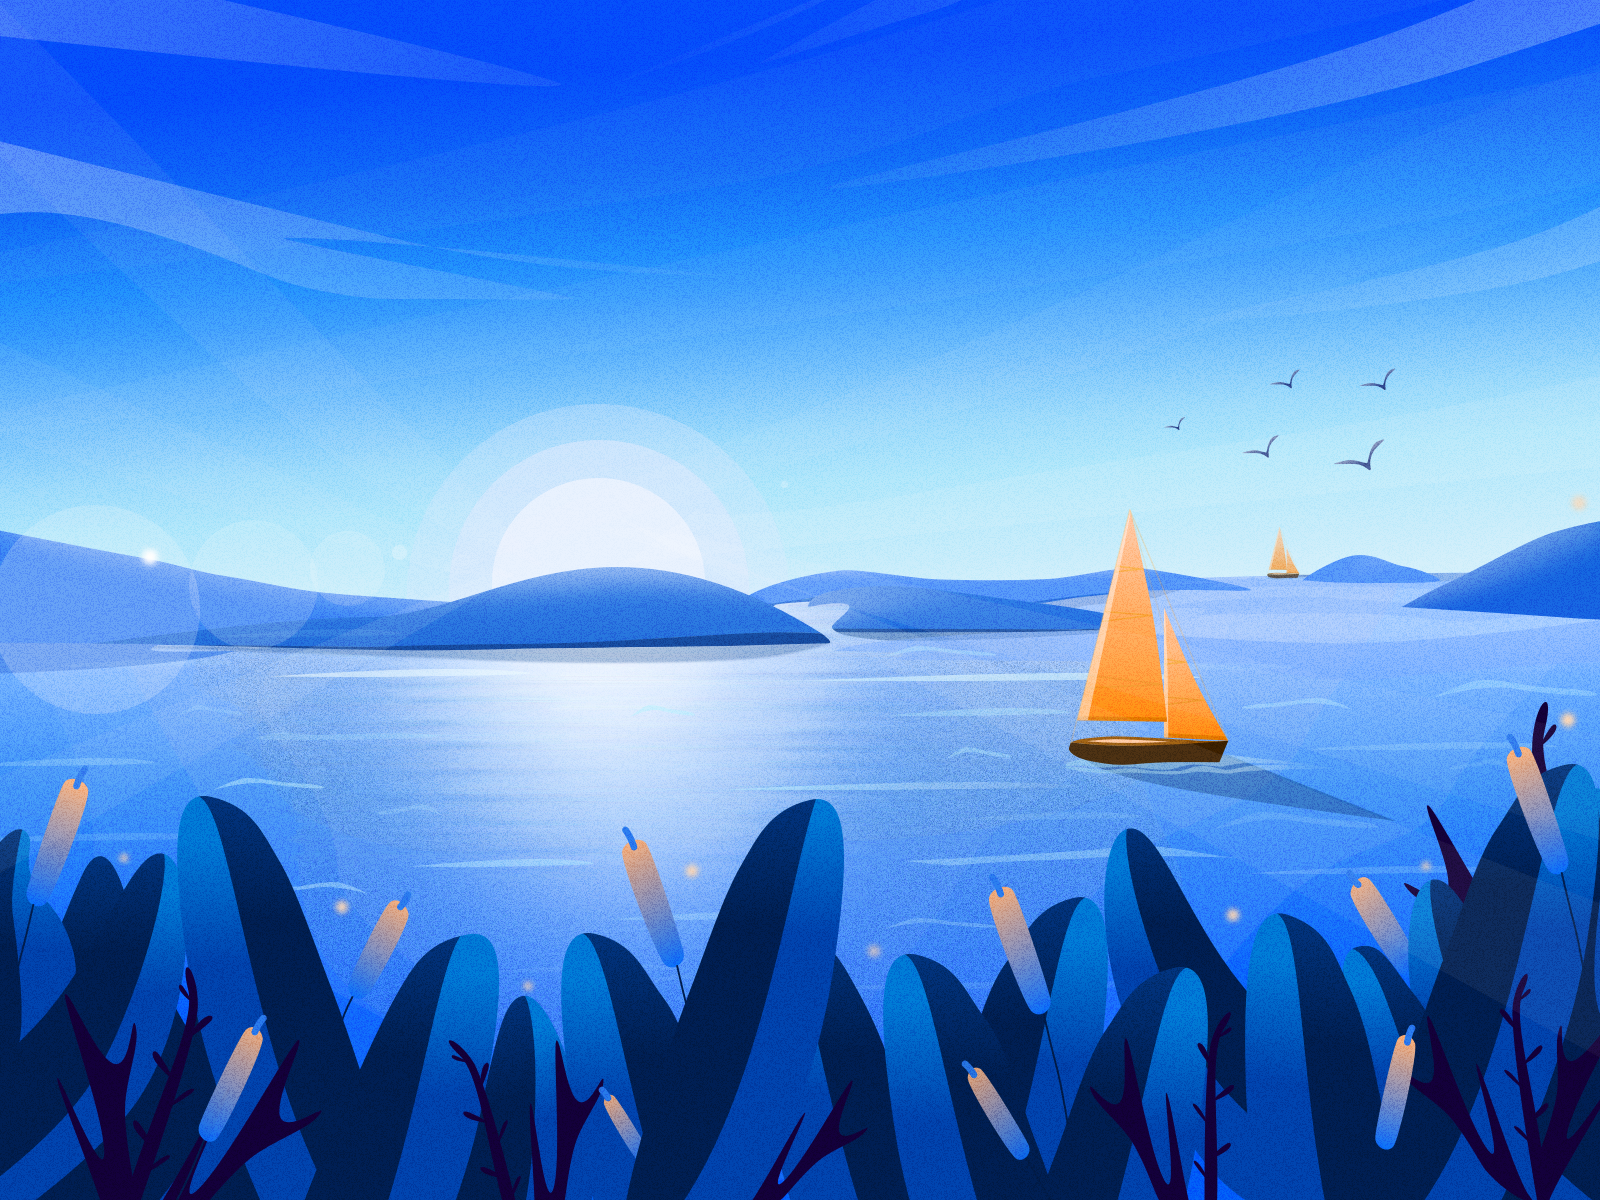 Calm sea by Ss for BestDream on Dribbble